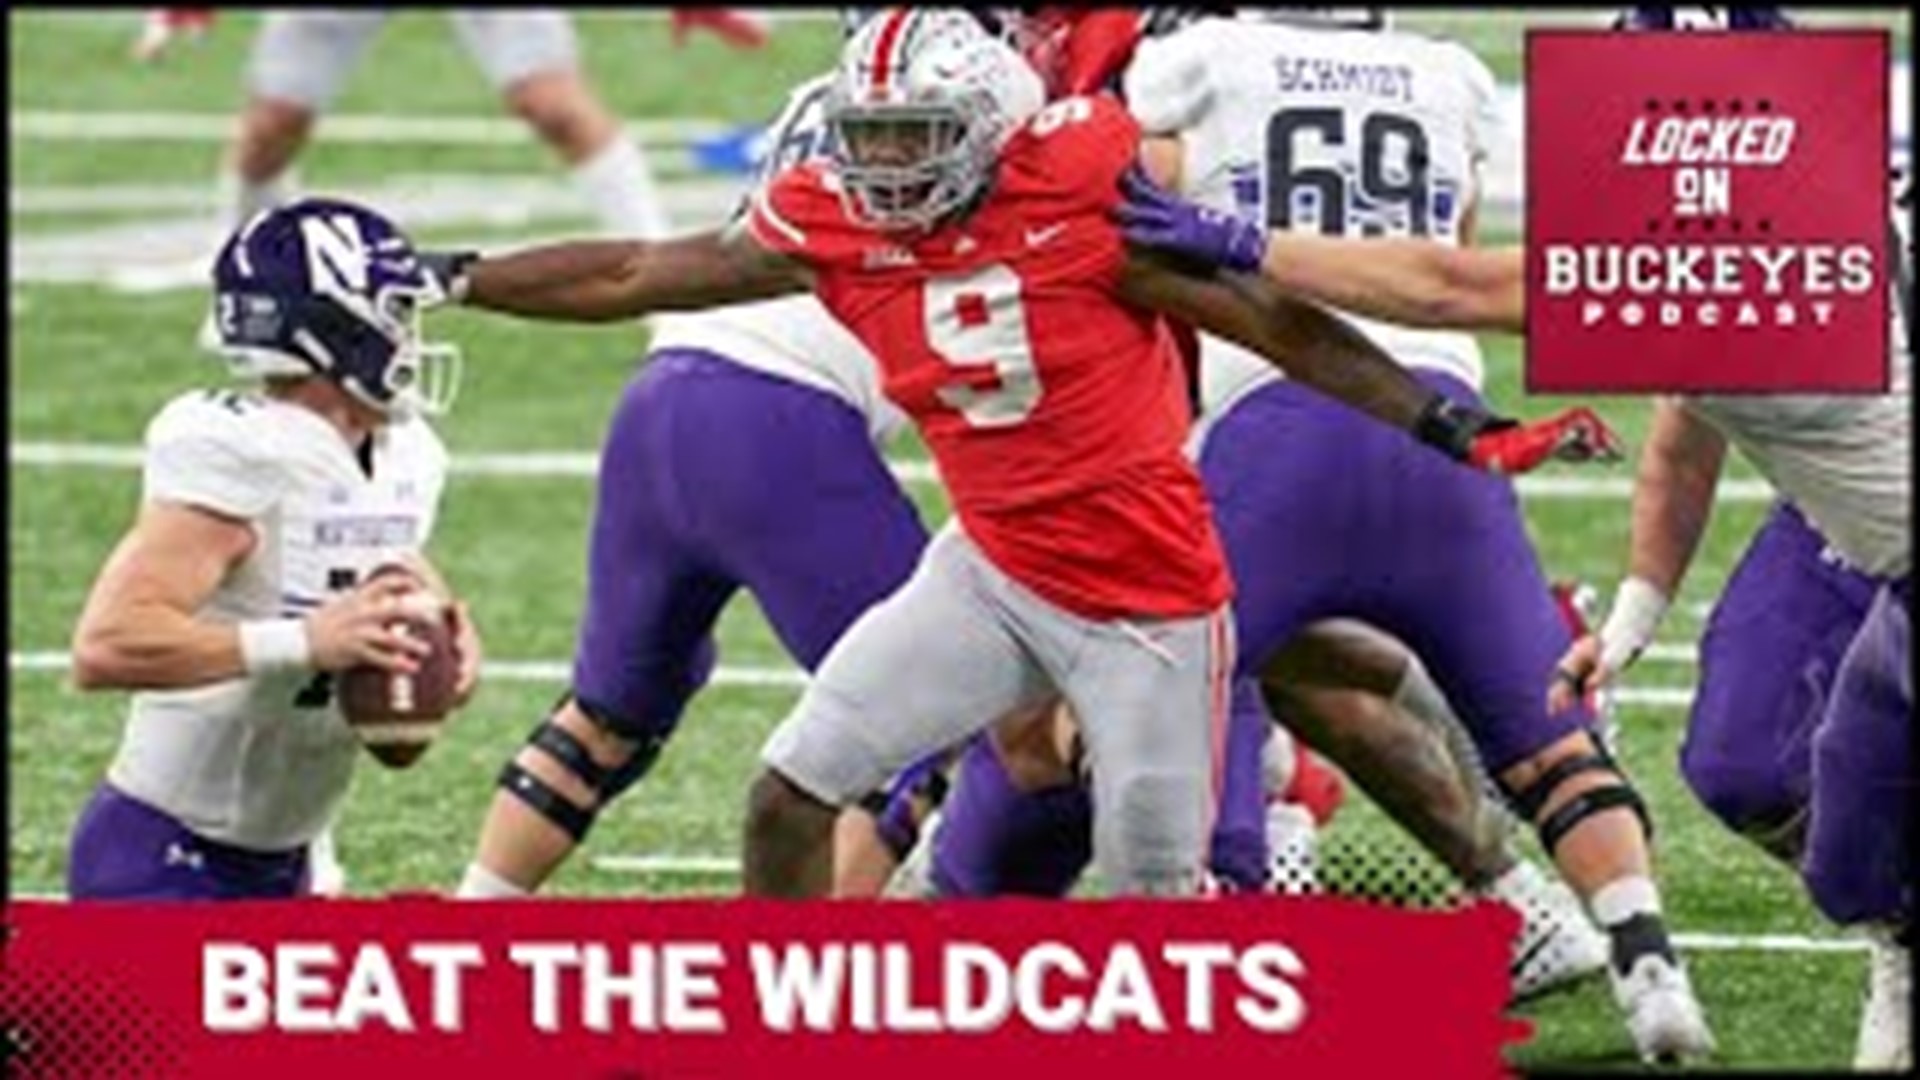 For the first time since 2020, the Ohio State Buckeyes and Northwestern Wildcats will meet on the football field.